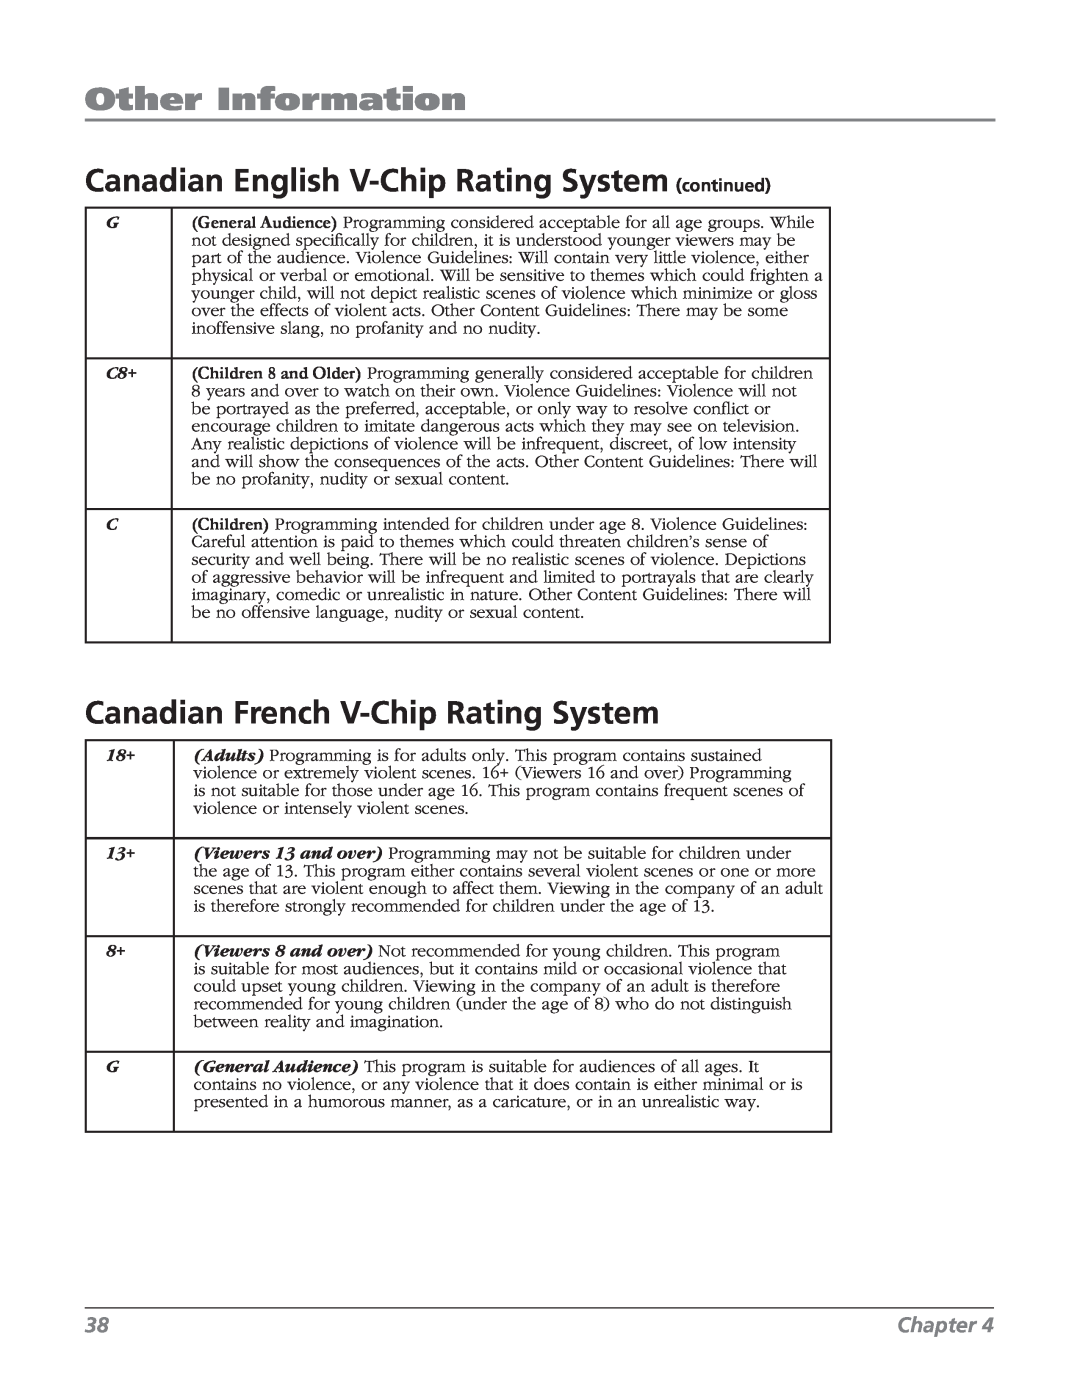 RCA 32V524T manual Other Information, Canadian English V-Chip Rating System continued, Canadian French V-Chip Rating System 